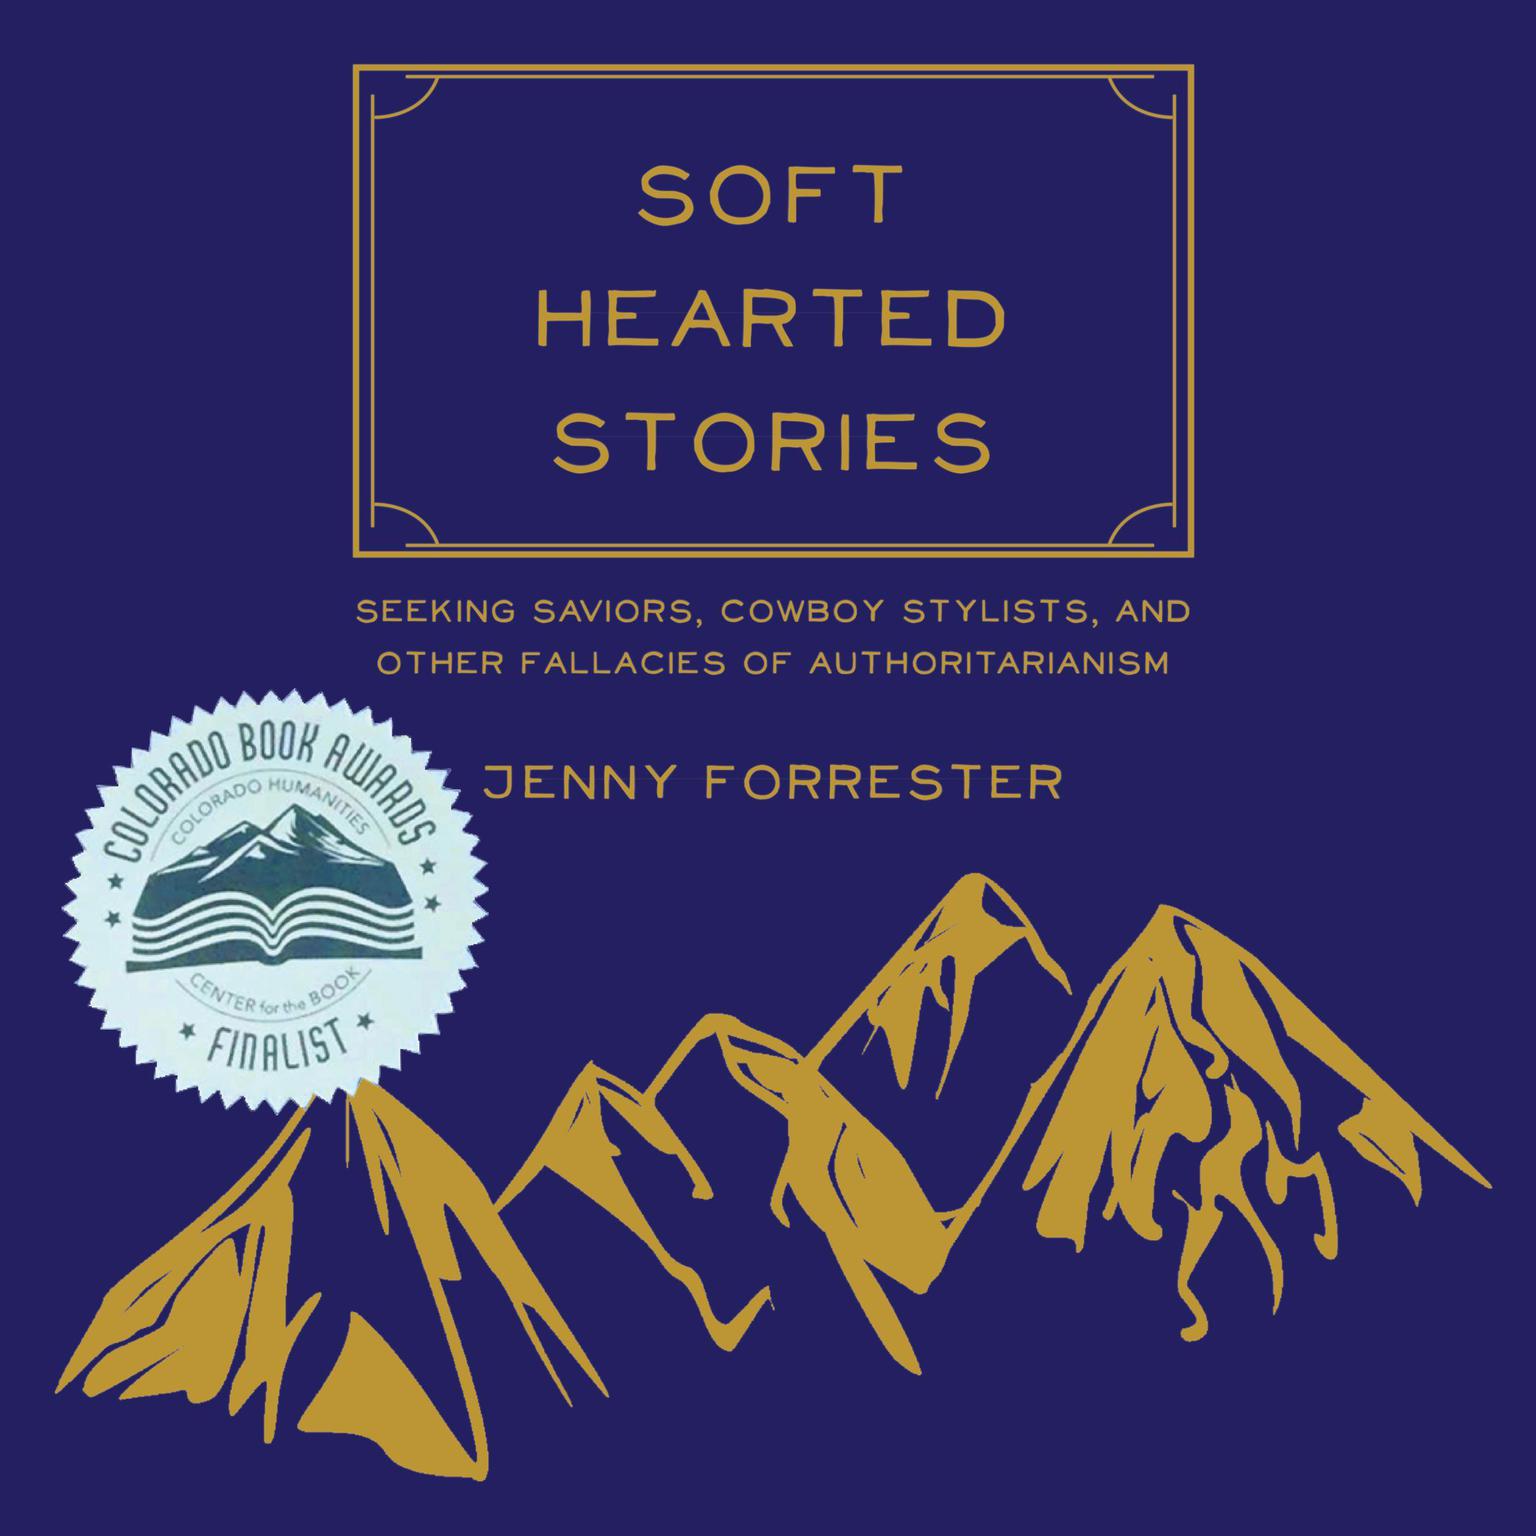 Soft Hearted Stories: Seeking Saviors, Cowboy Stylists, and Other Fallacies of Authoritarianism Audiobook, by Jenny Forrester